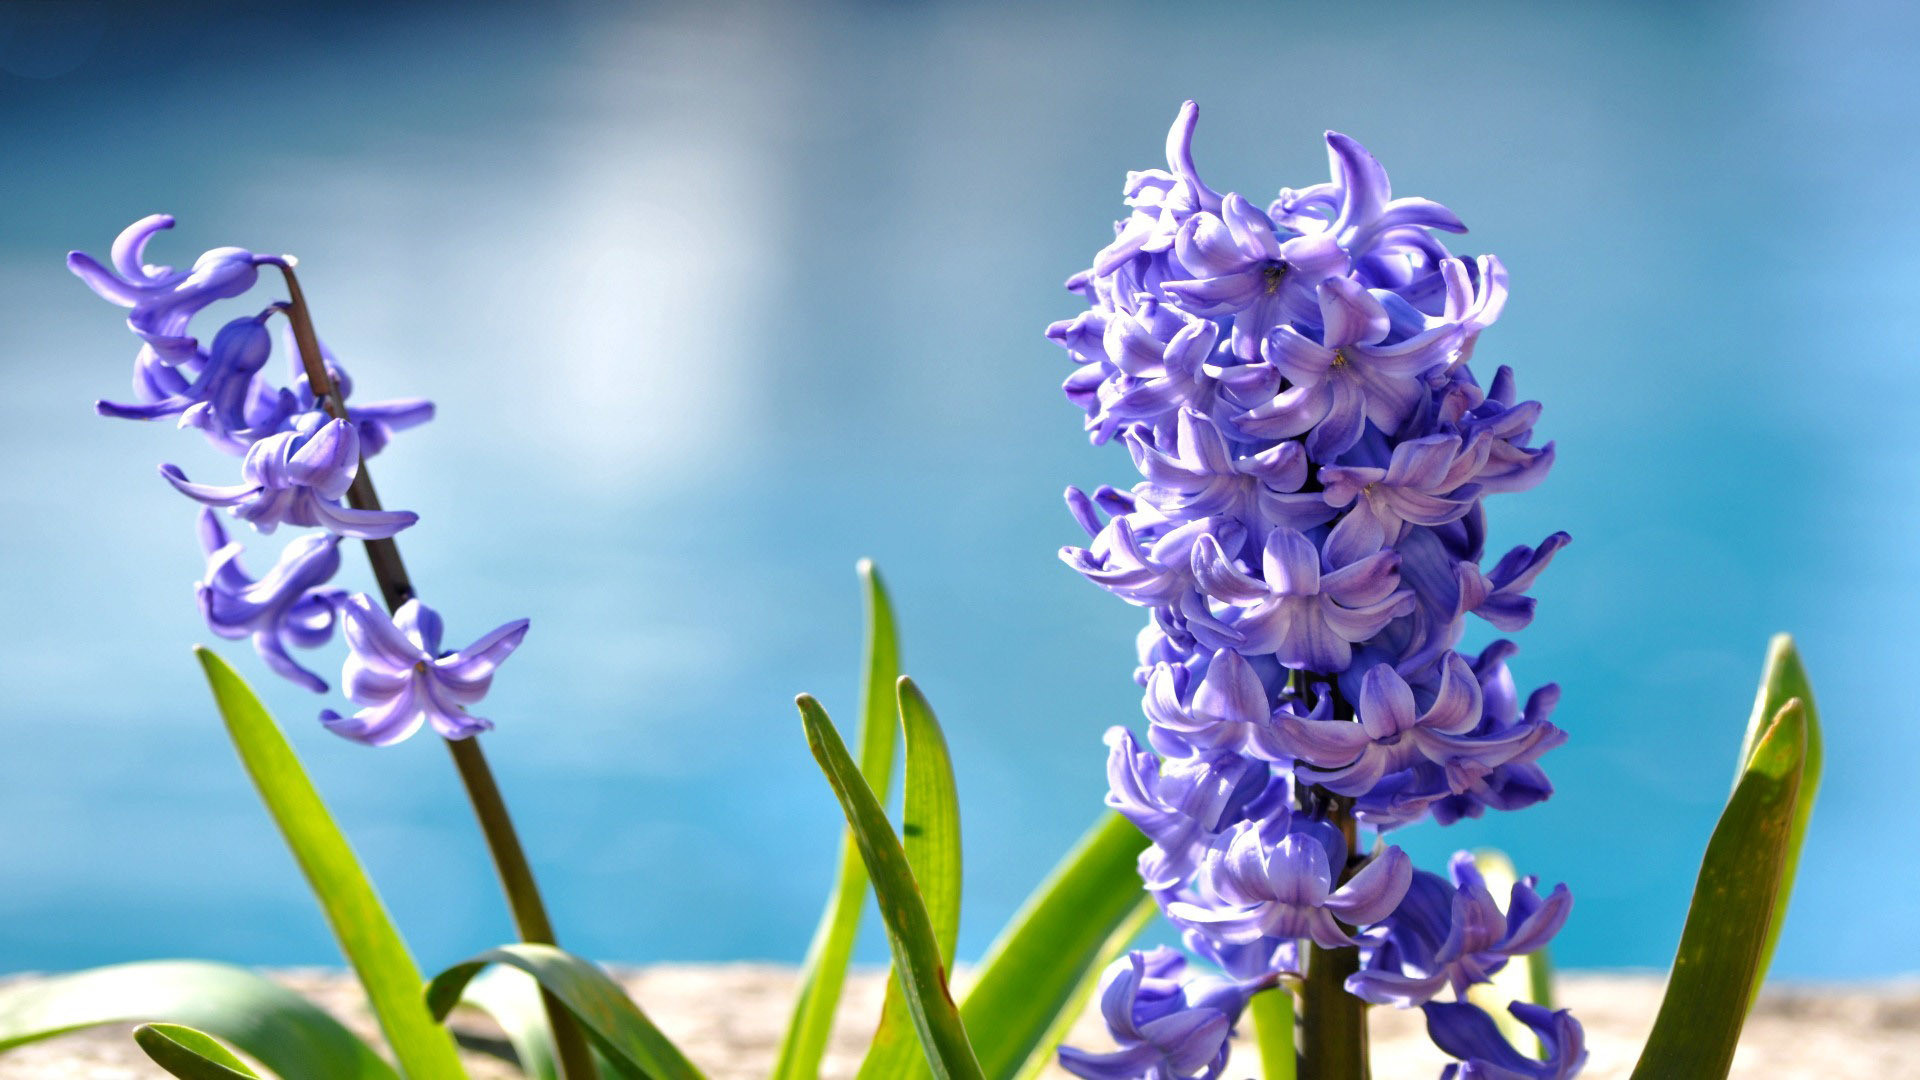 1920x1080 ... Images of Hyacinth Wallpaper - #SC ...